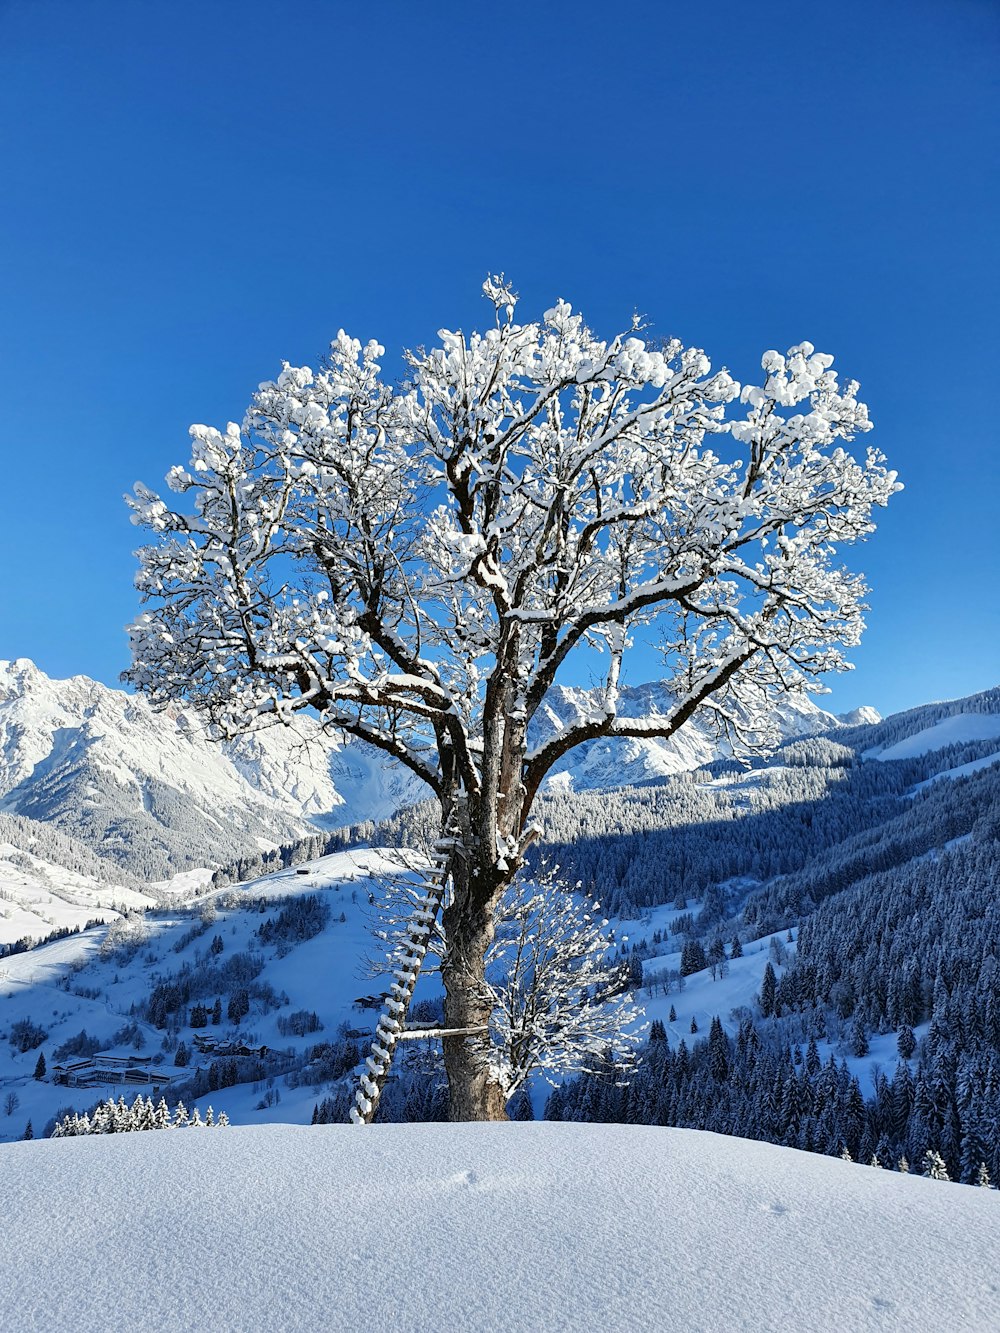 a snow covered tree in the middle of a snowy mountain